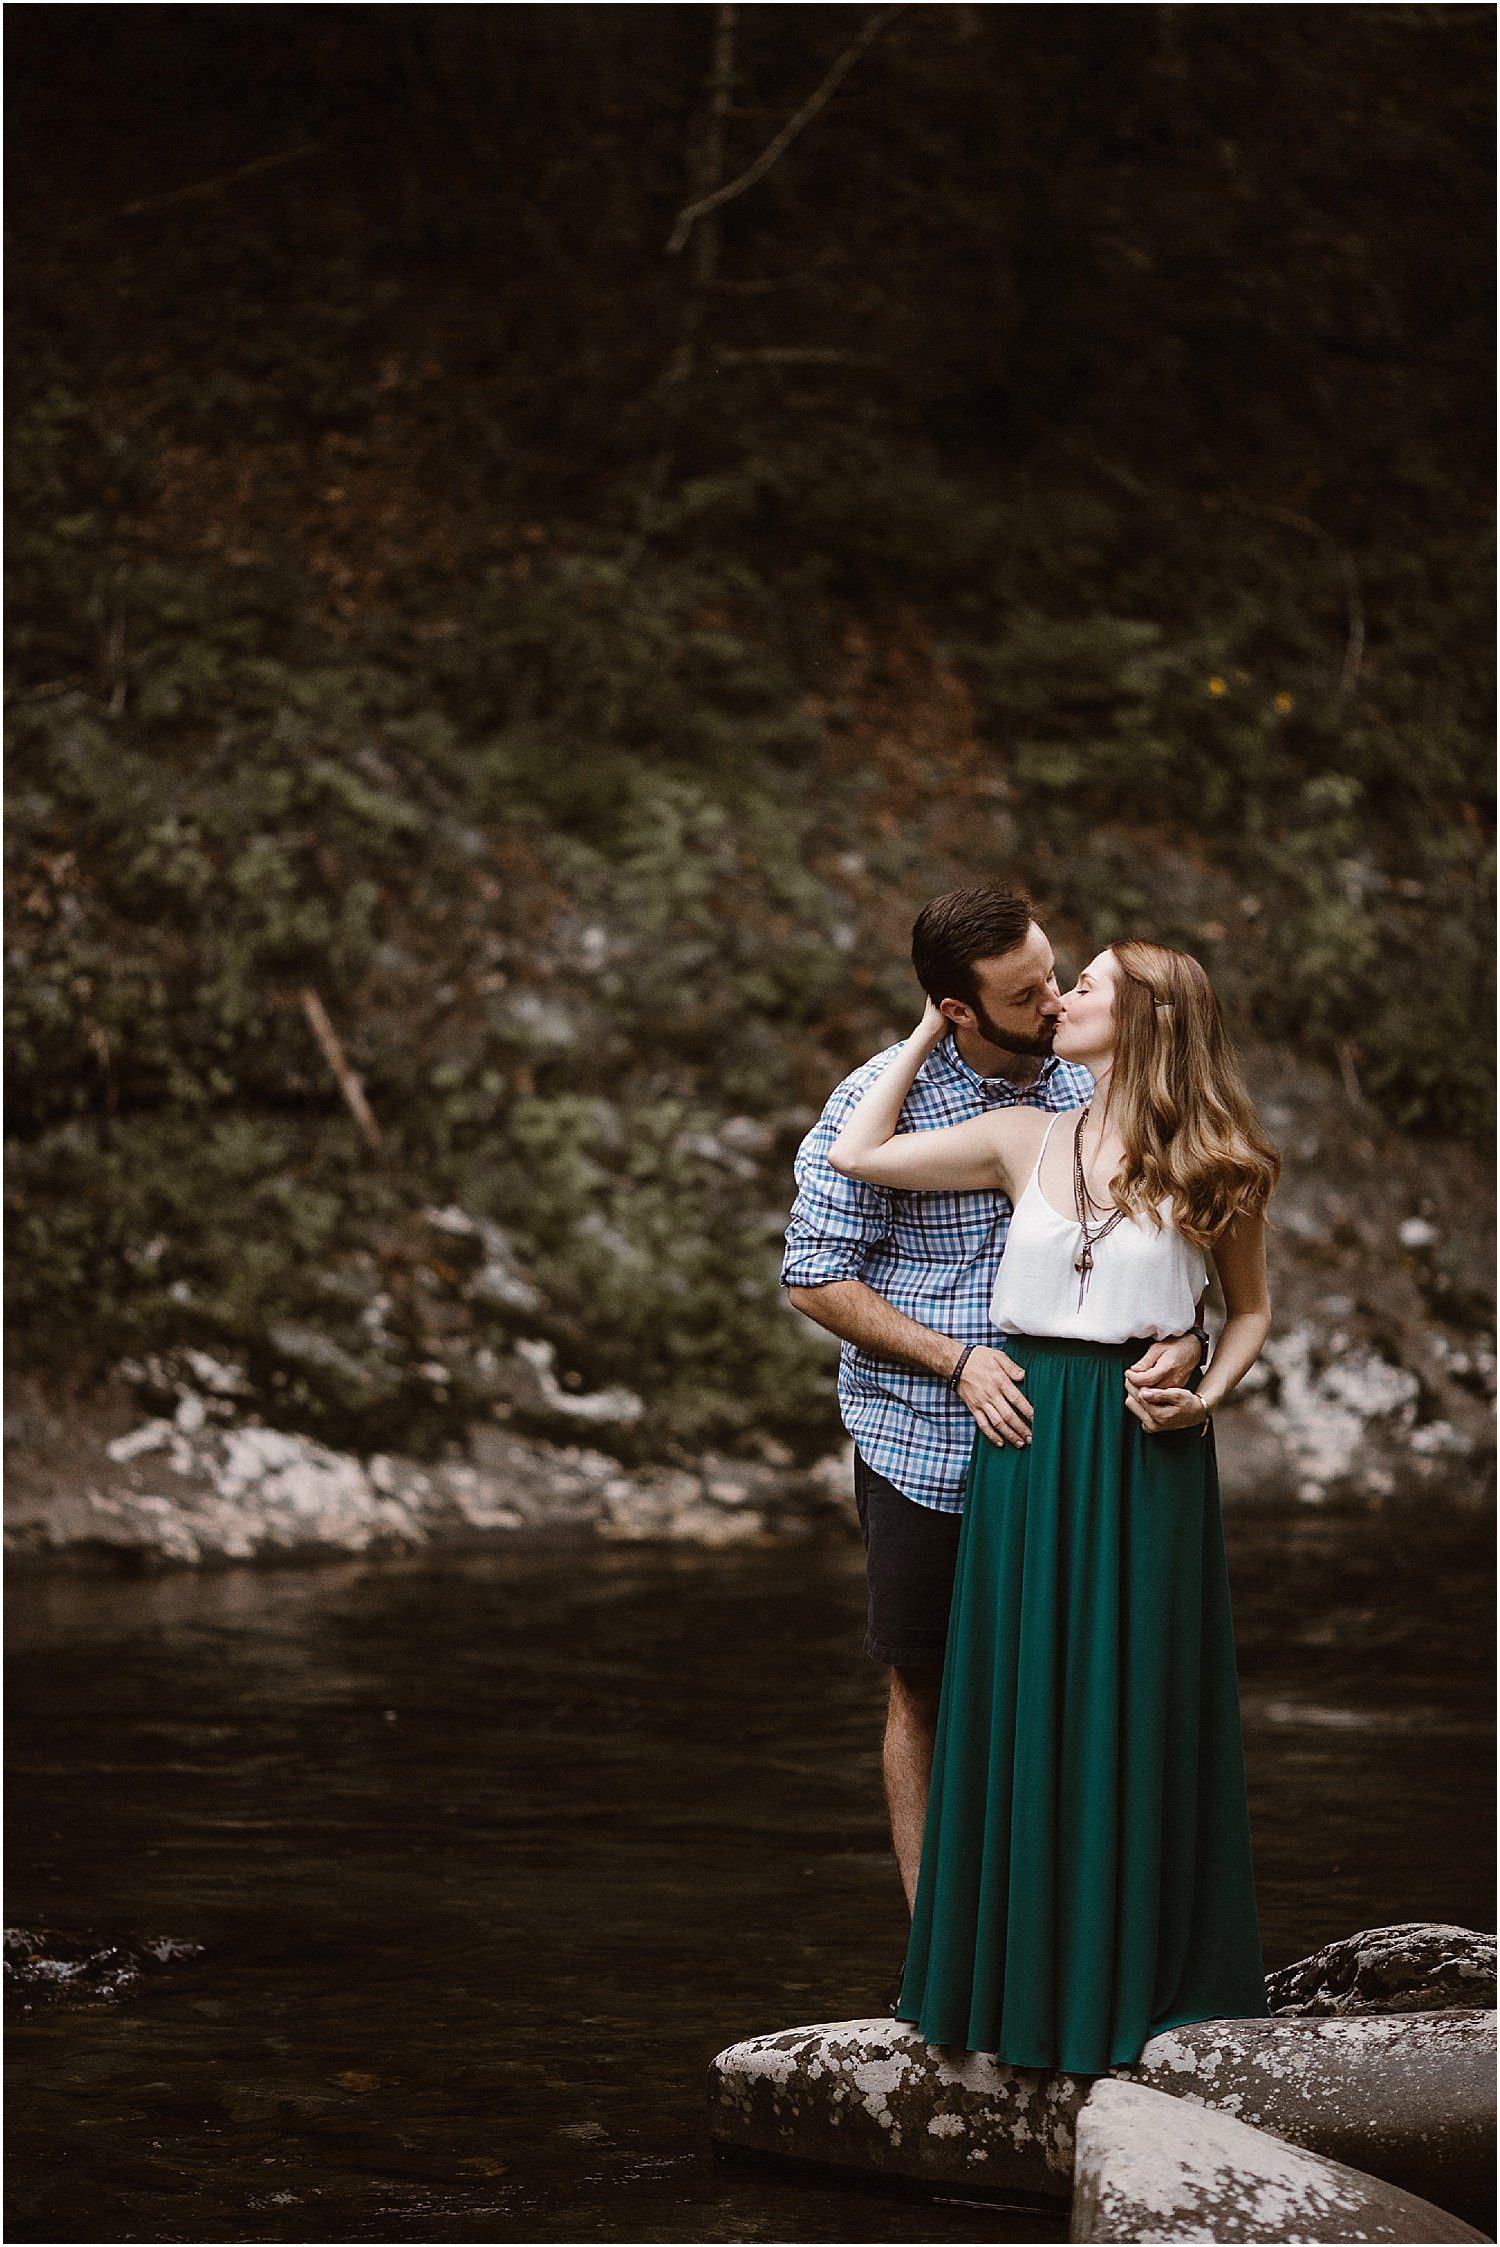 girl in white and green dress kissing man in plaid shirt on river